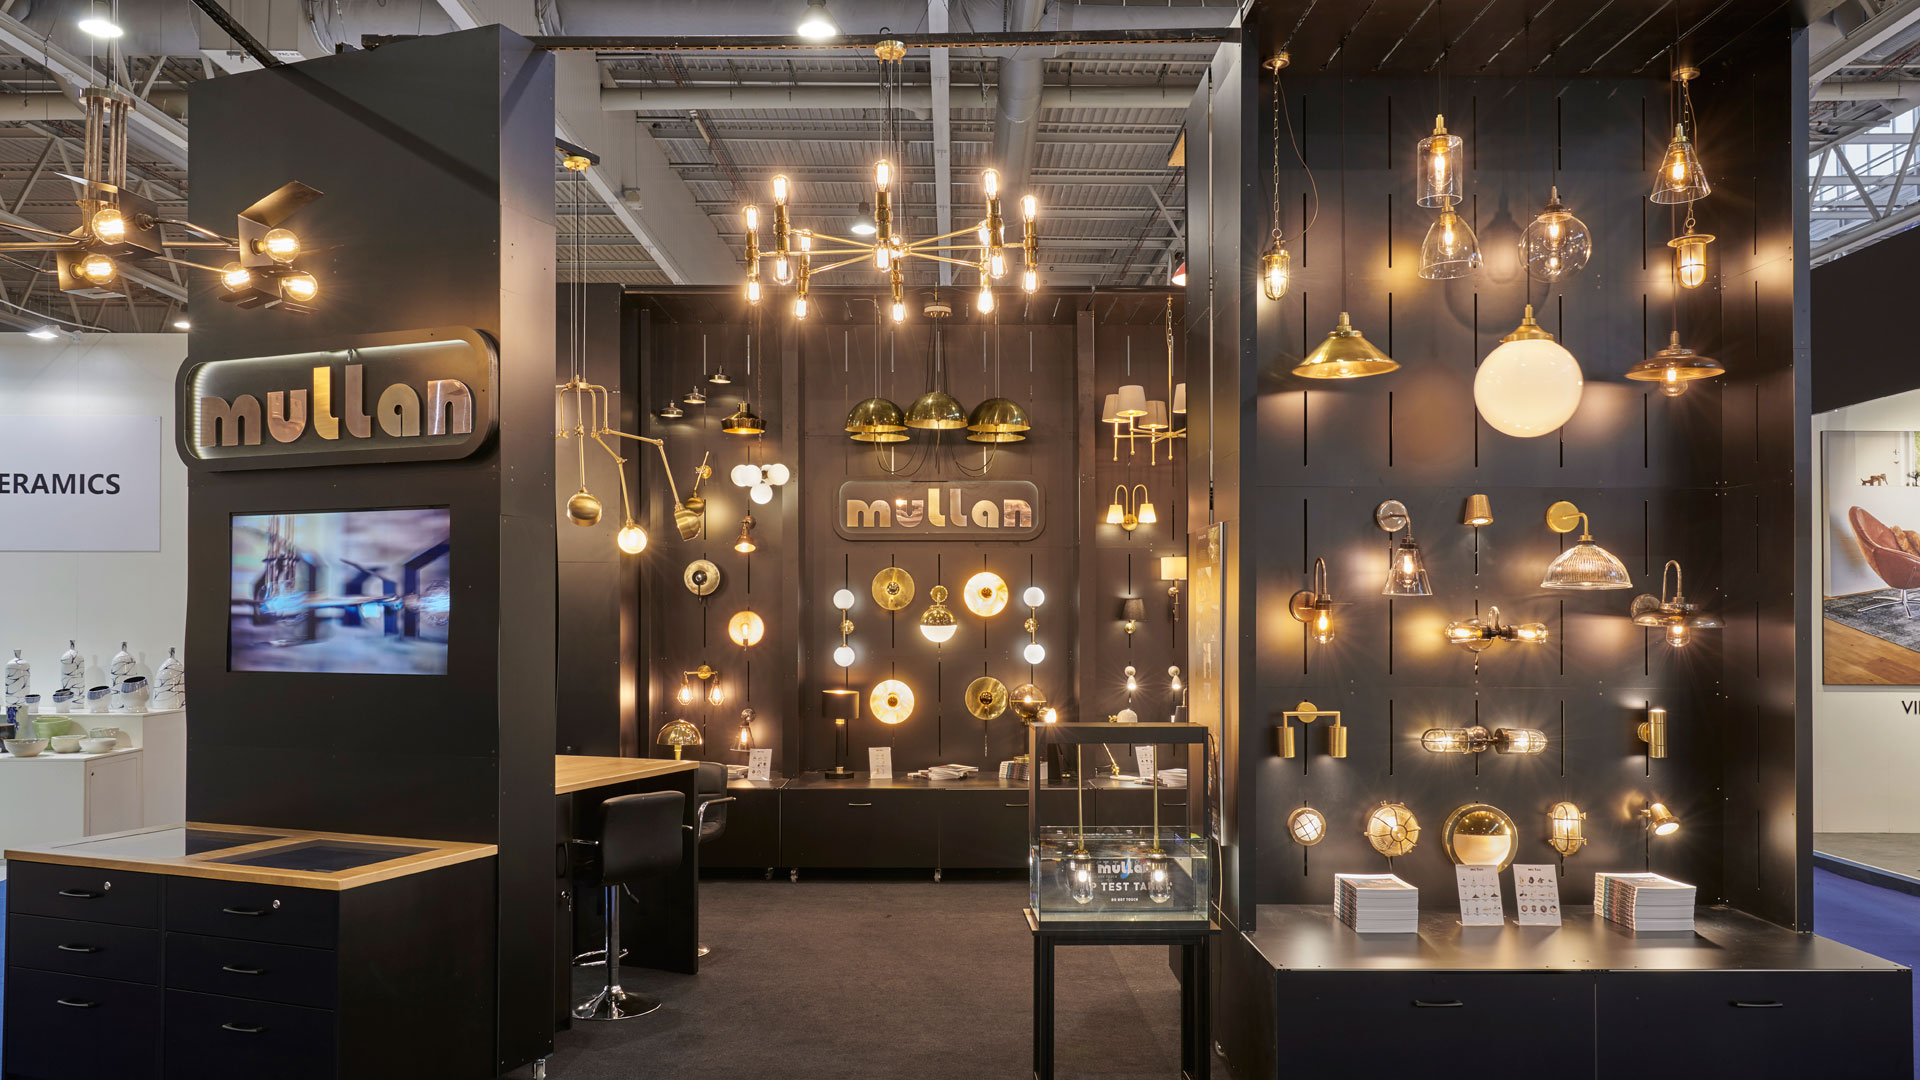 We're kicking off our 2019 trade show schedule at IMM Cologne